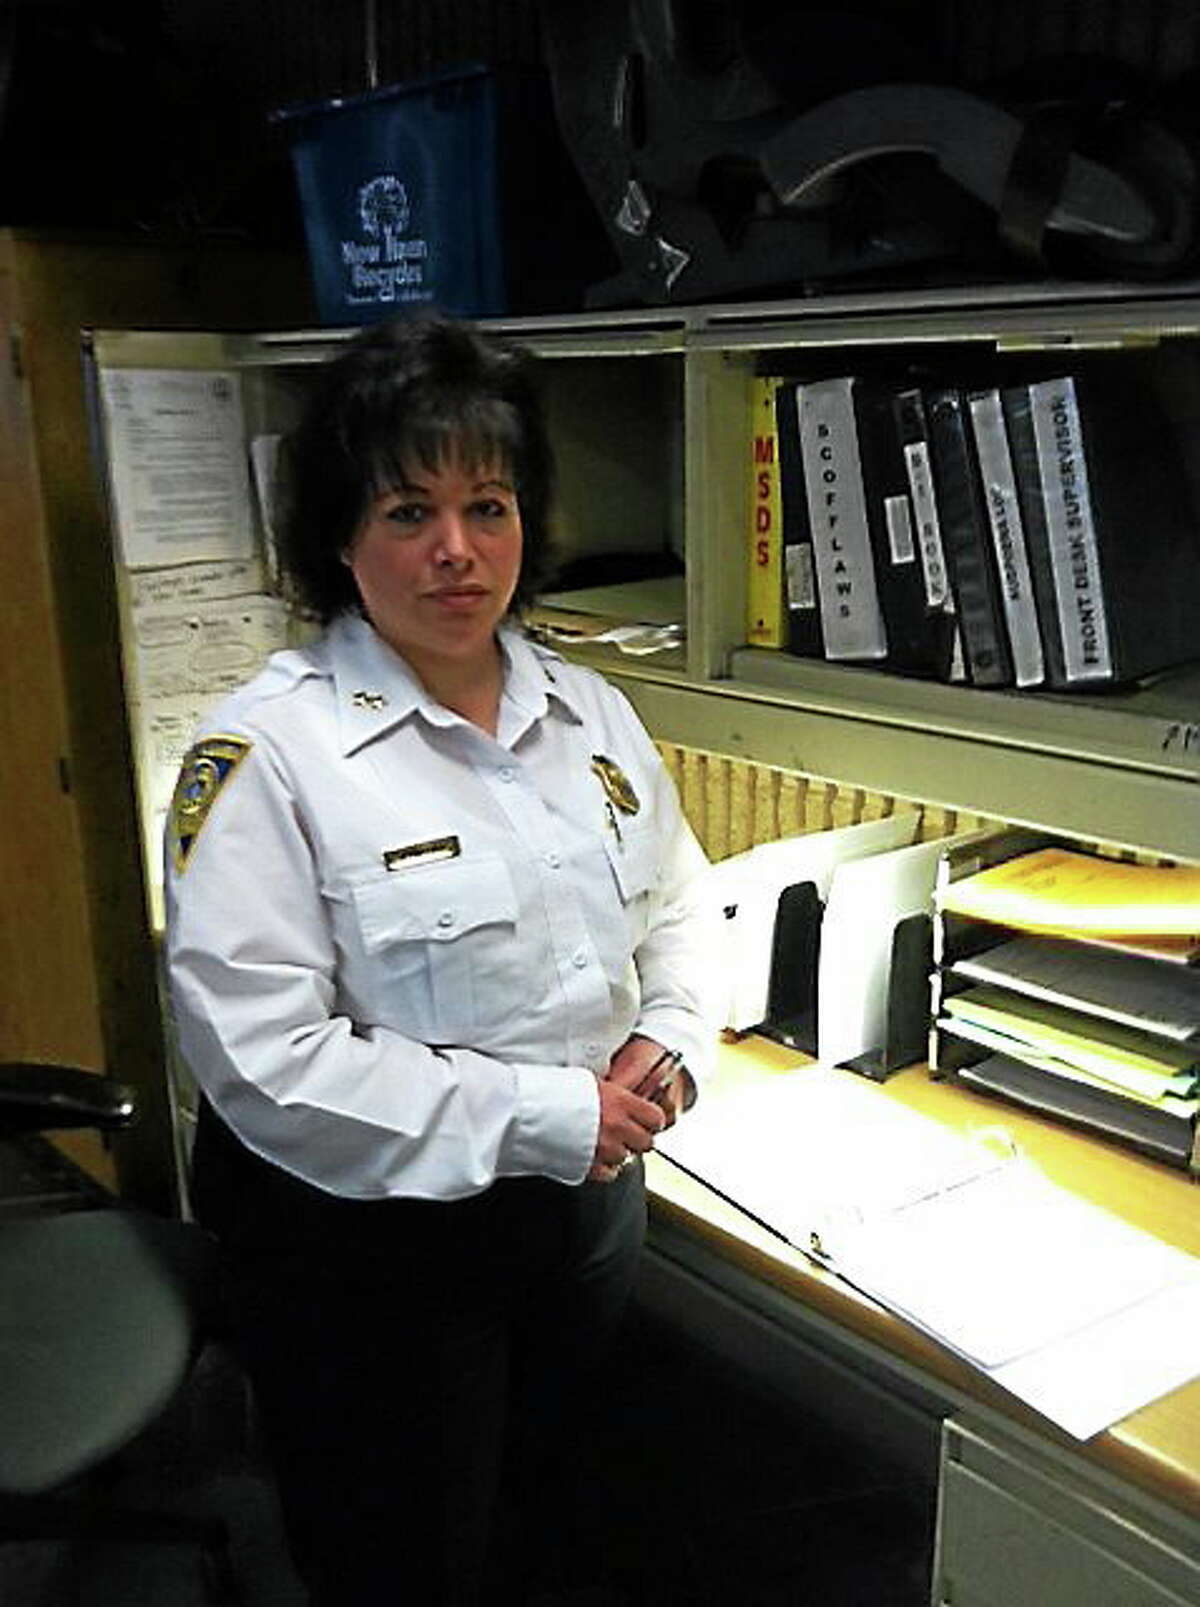 New Haven police have an arrest log now available for the public to review, after they failed a Freedom of Information compliance check conducted by staff at the New Haven Register and sister newspapers. Assistant Chief of Police Denise Blanchard stands next to the new arrest log. It is available for viewing 24 hours a day, seven days a week. (Michelle Tuccitto Sullo — New Haven Register)